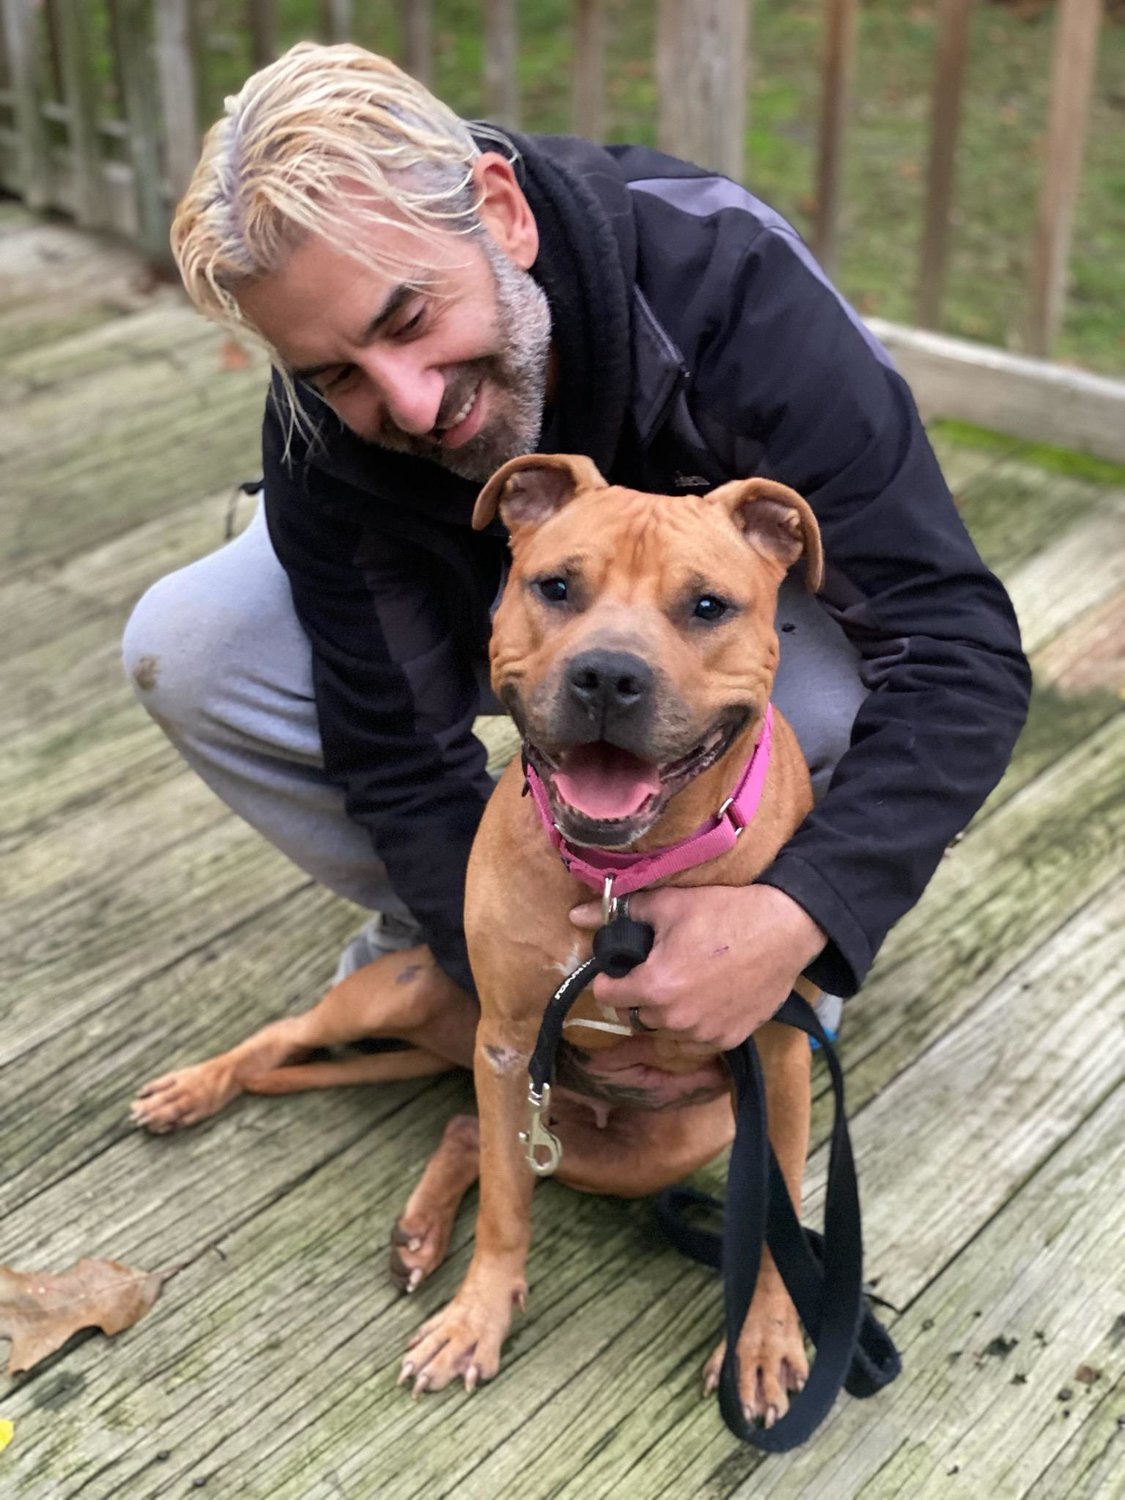 Athena with Tuncay Adem, a Canine Counsel Dog Training behaviorist. The pit bull-terrier mix, which was abandoned in Freeport, has received training, and love, from Adem, which has helped turn her into a happy and healthy candidate for adoption.